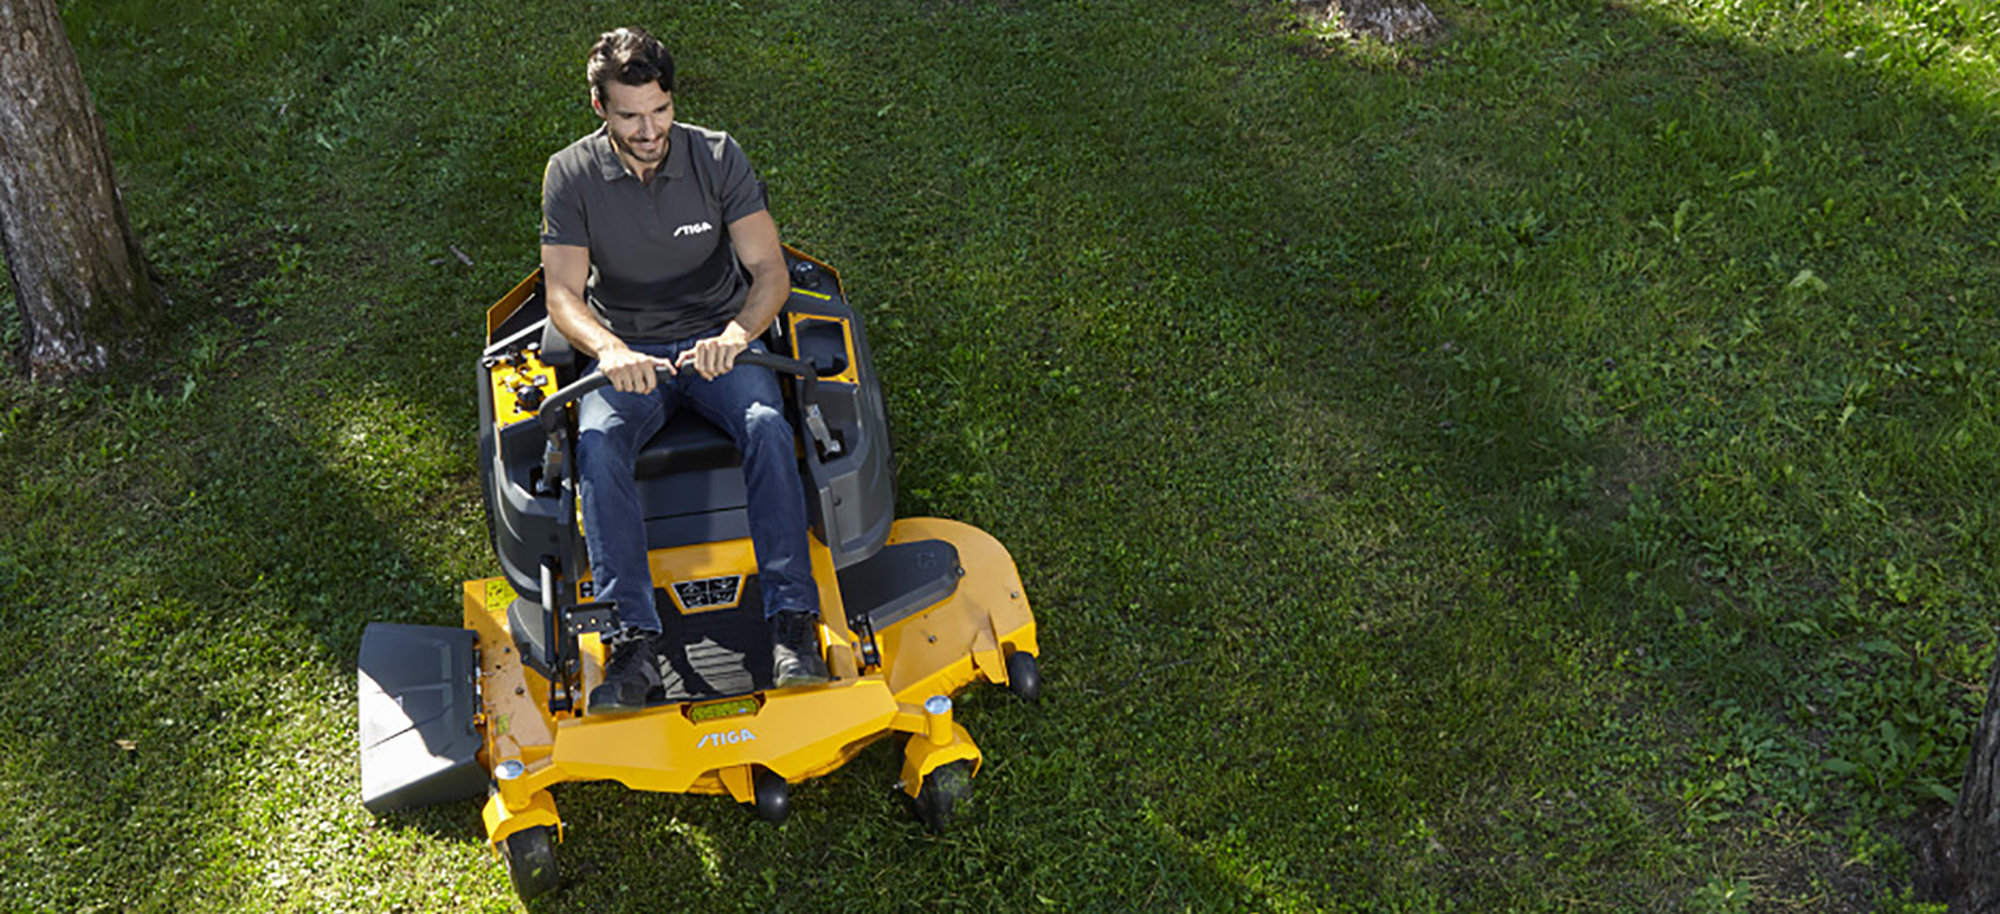 "The combination of Kawasaki and STIGA results in gardening machinery of superior professional quality and reliability."